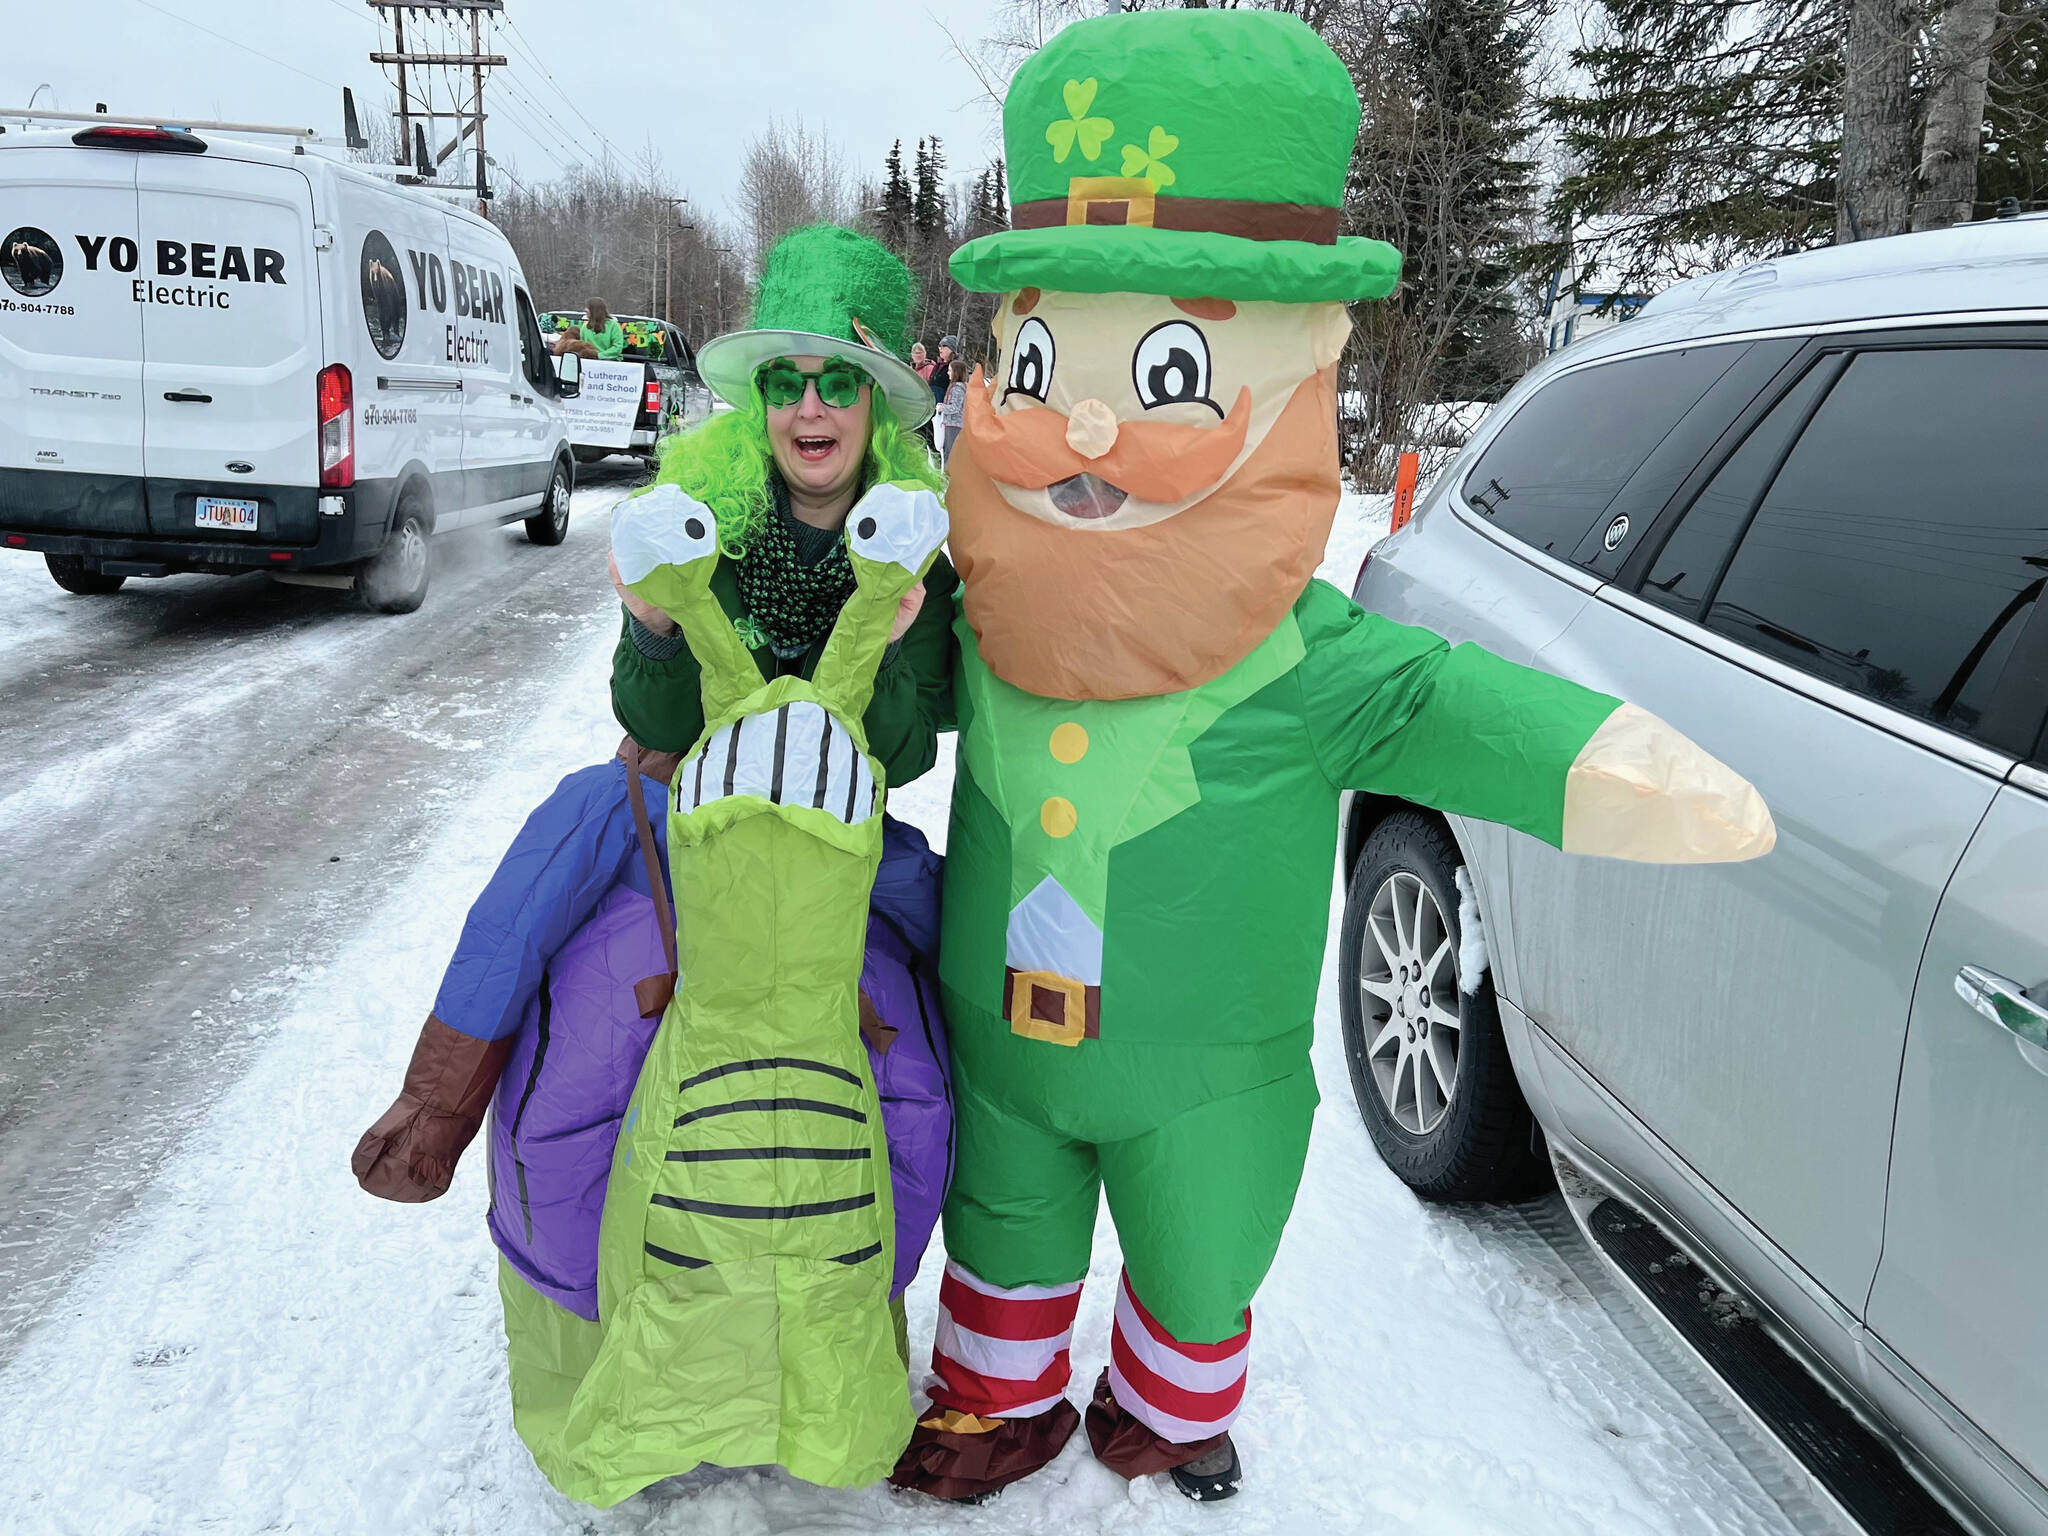 Photo provided by Sara Hondel
Sara Hondel stands with a leprechaun during Sweeney’s St. Patrick’s Day Parade in Soldotna on Sunday. Green, leprechauns and Nugget the Moose poured down the streets for the 34th annual parade hosted by the Soldotna Chamber of Commerce. Under cloudy skies — but fortunately no precipitation — a procession of viridescent celebrants representing businesses and organizations brought festivities to an array of attendees lining Redoubt Avenue.